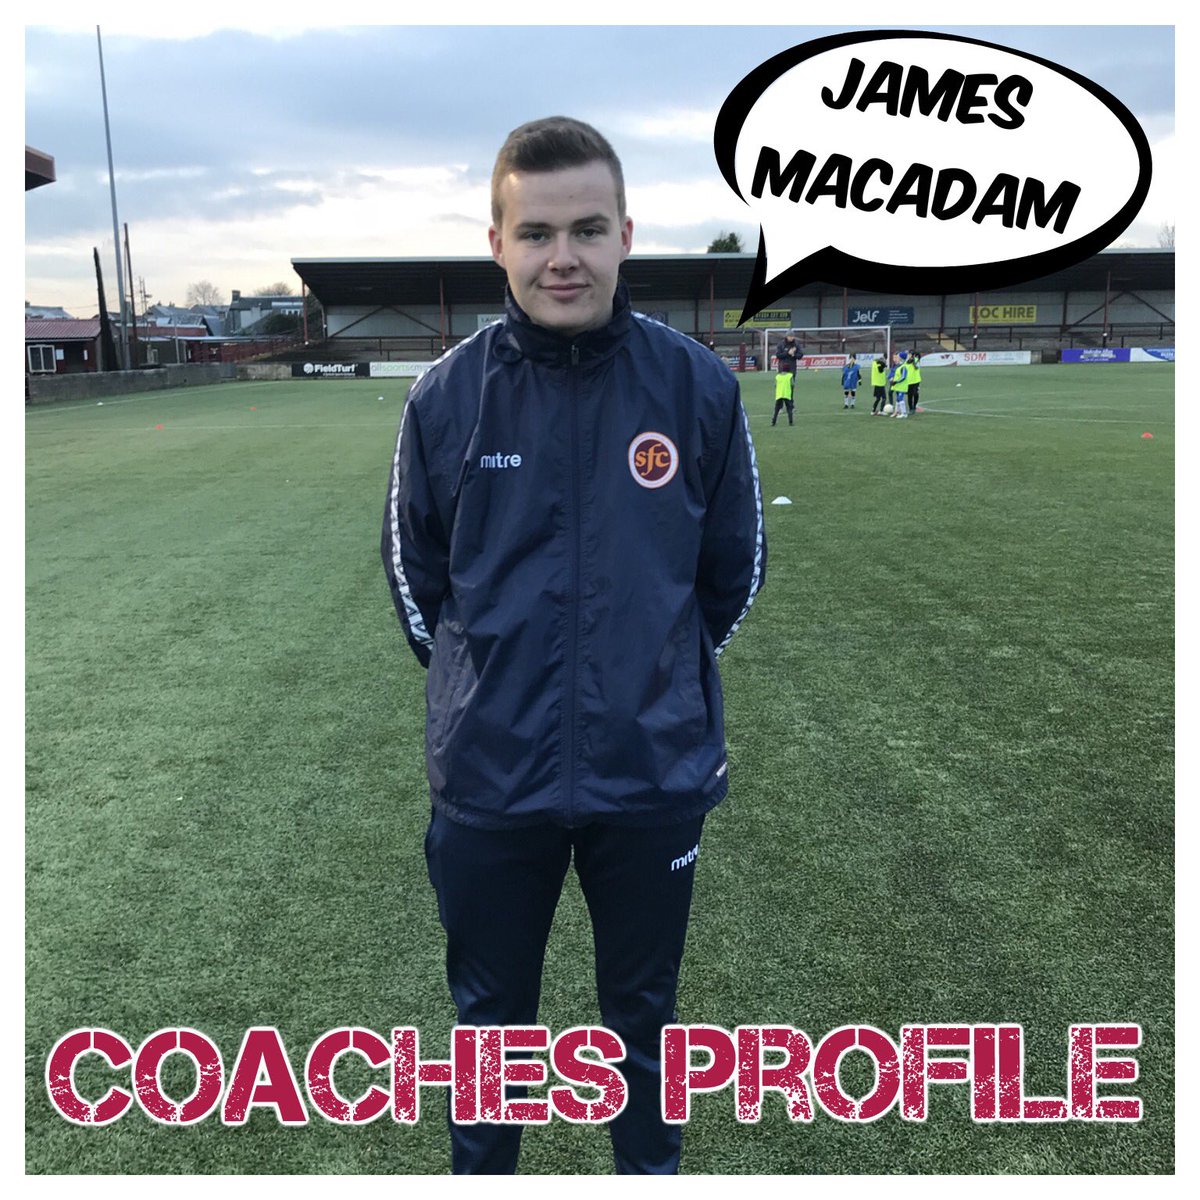 COACHES PROFILE

Next up is @stenny_afc Team Player & NEW Community Coach ⬇️

Name- James MacAdam
Age- 18
Team / Programme- Young Maroons / 2004s
Favourite Skill- Scoop Turn
Favourite Player- Lionel Messi
Favourite Team- Manchester City / Stenhousemuir FC
Twitter- @JamesMacadam14